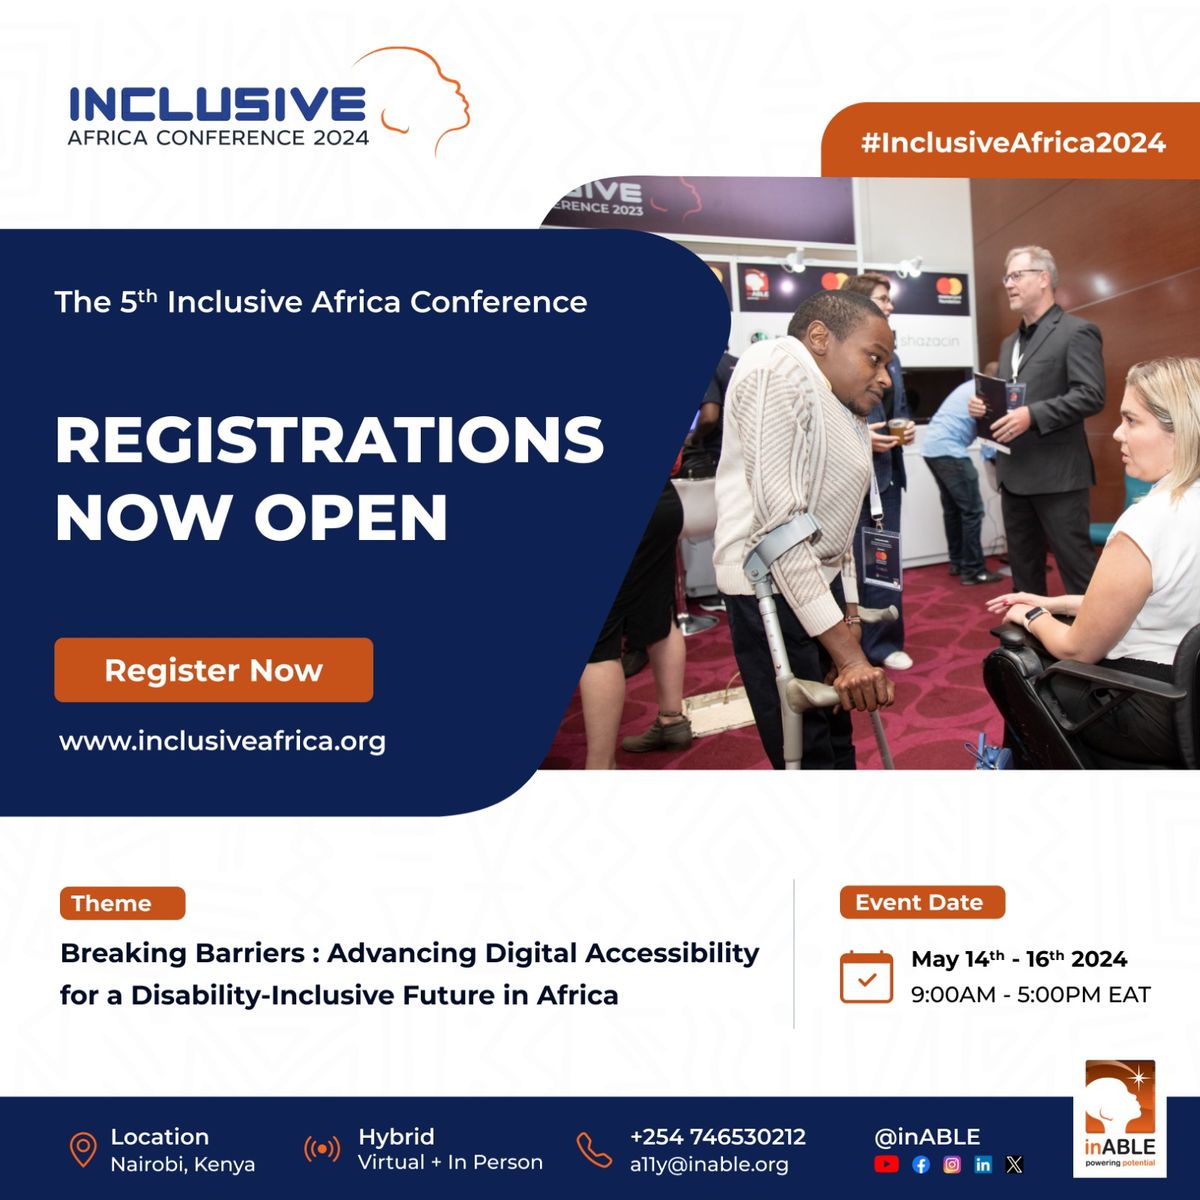 The 5th Inclusive Africa Conference - Nairobi, Kenya